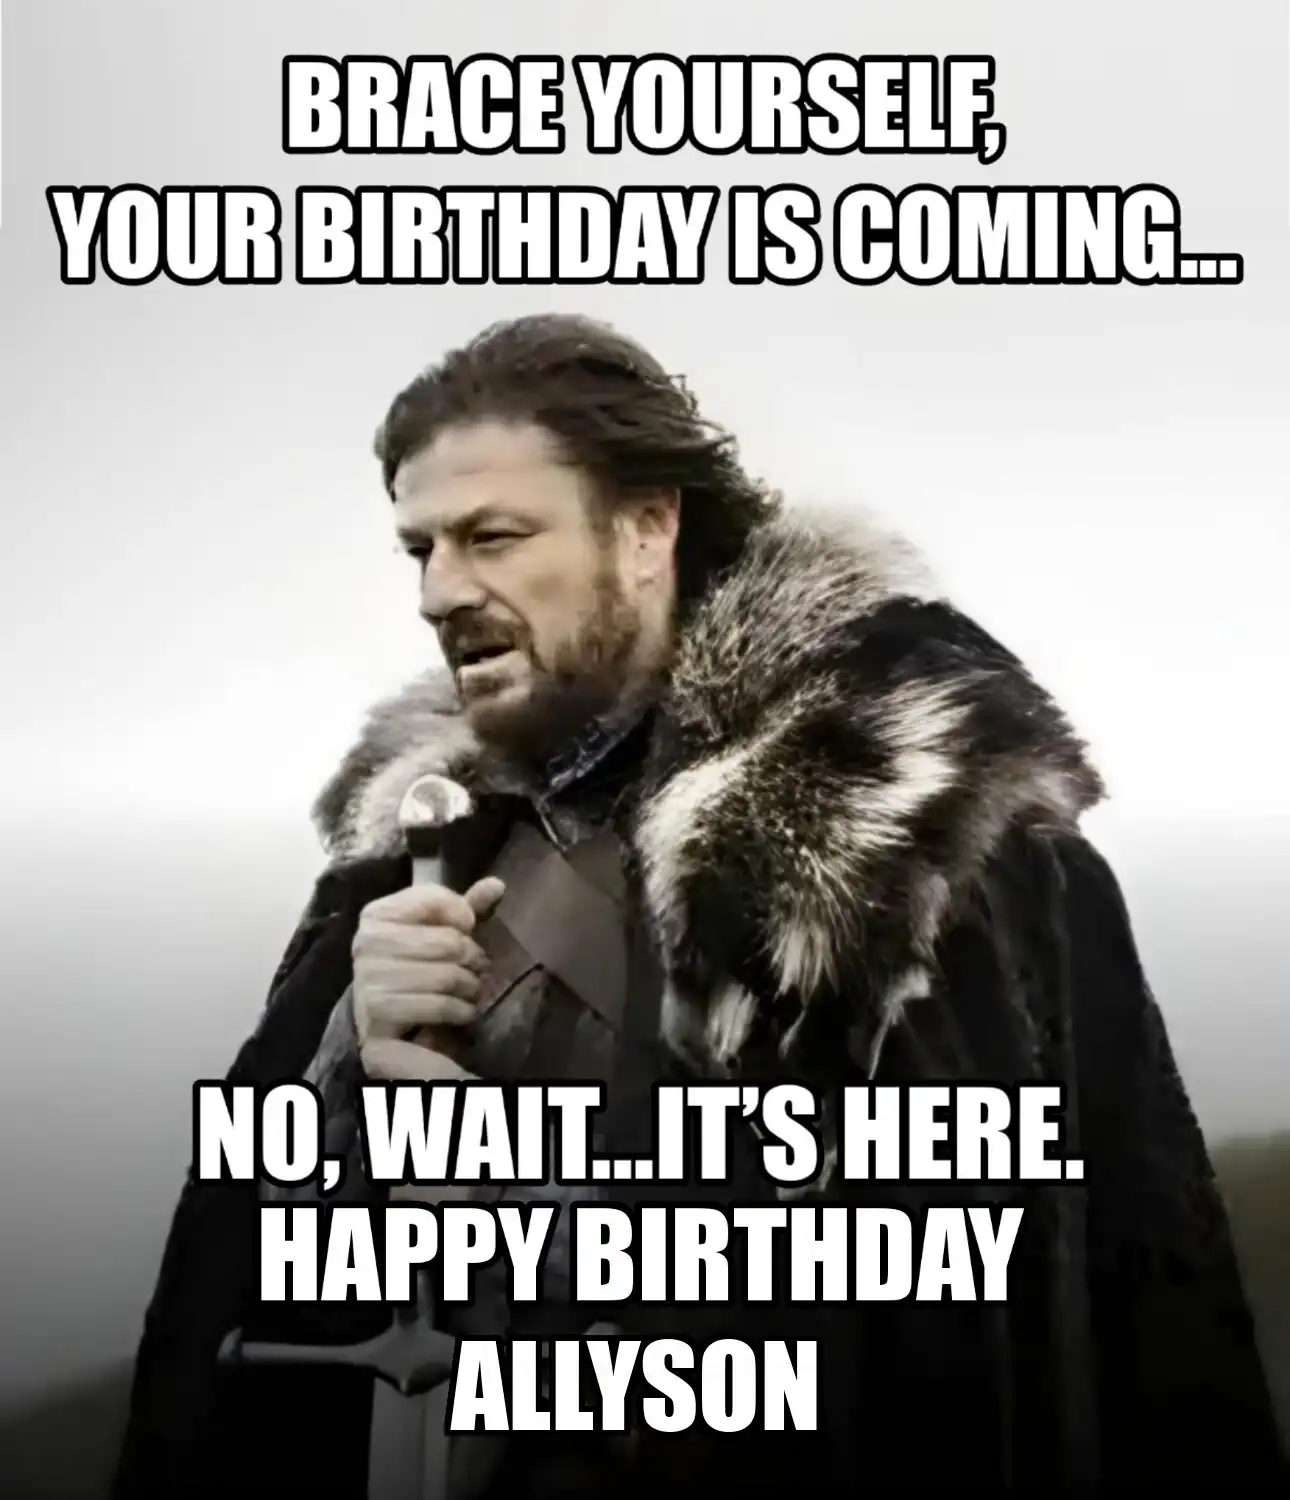 Happy Birthday Allyson Brace Yourself Your Birthday Is Coming Meme